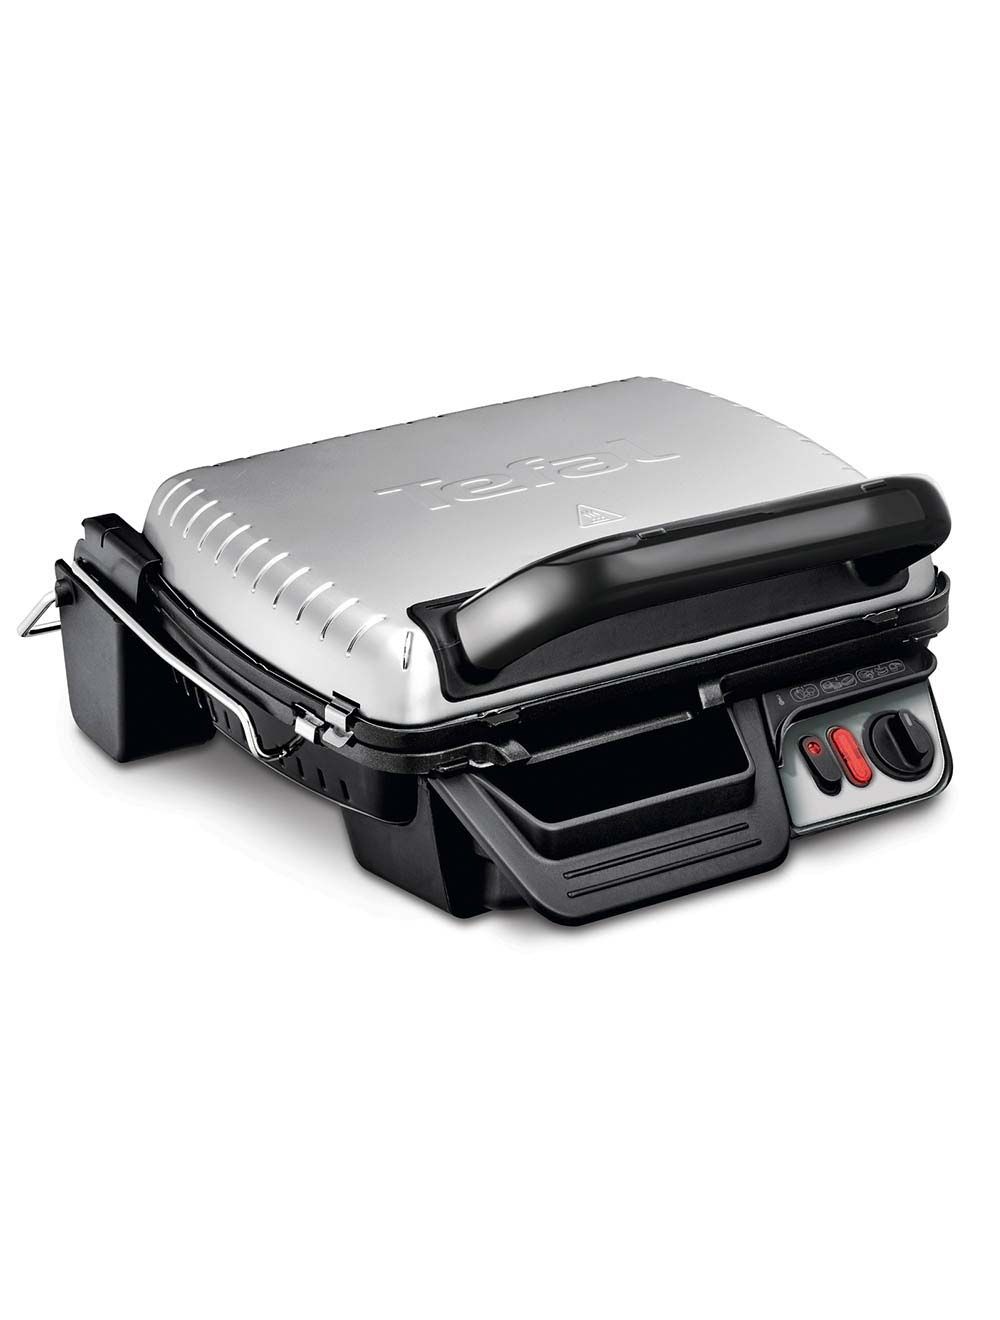 Tefal Ultra Compact Grill, 2000 Watts, GC306028